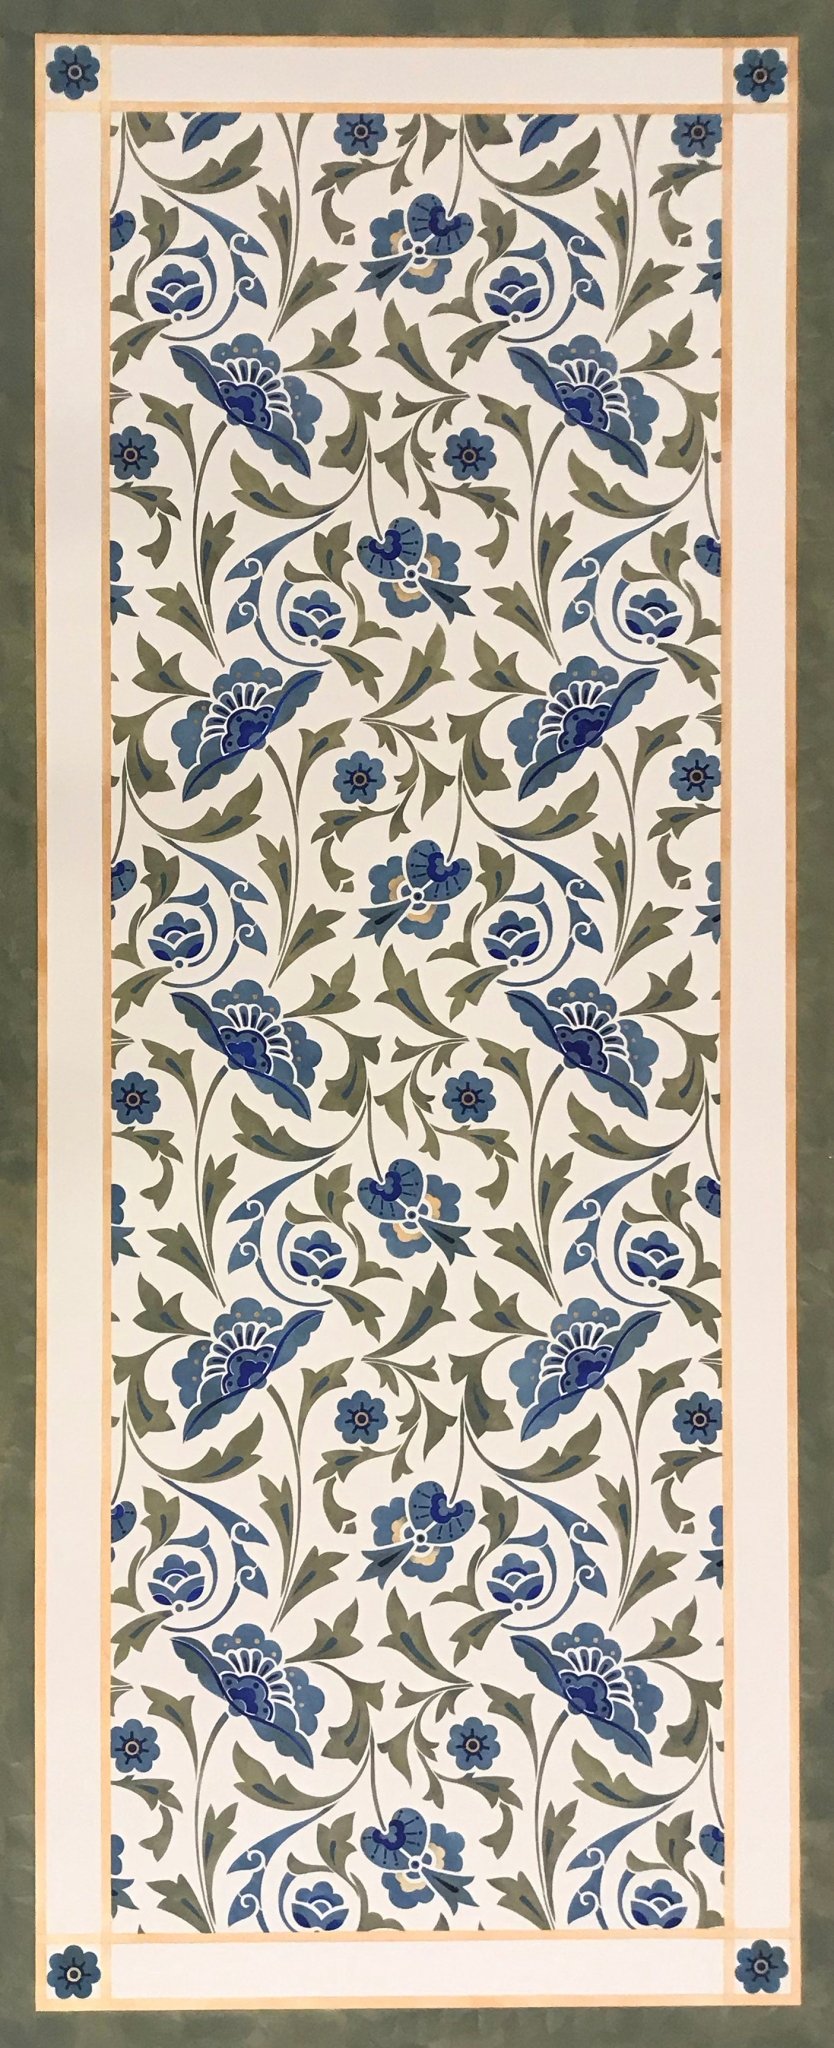 This is the full image of this floorcloth with an all-over floral pattern, based on a Christopher Dresser design, c. 1875.